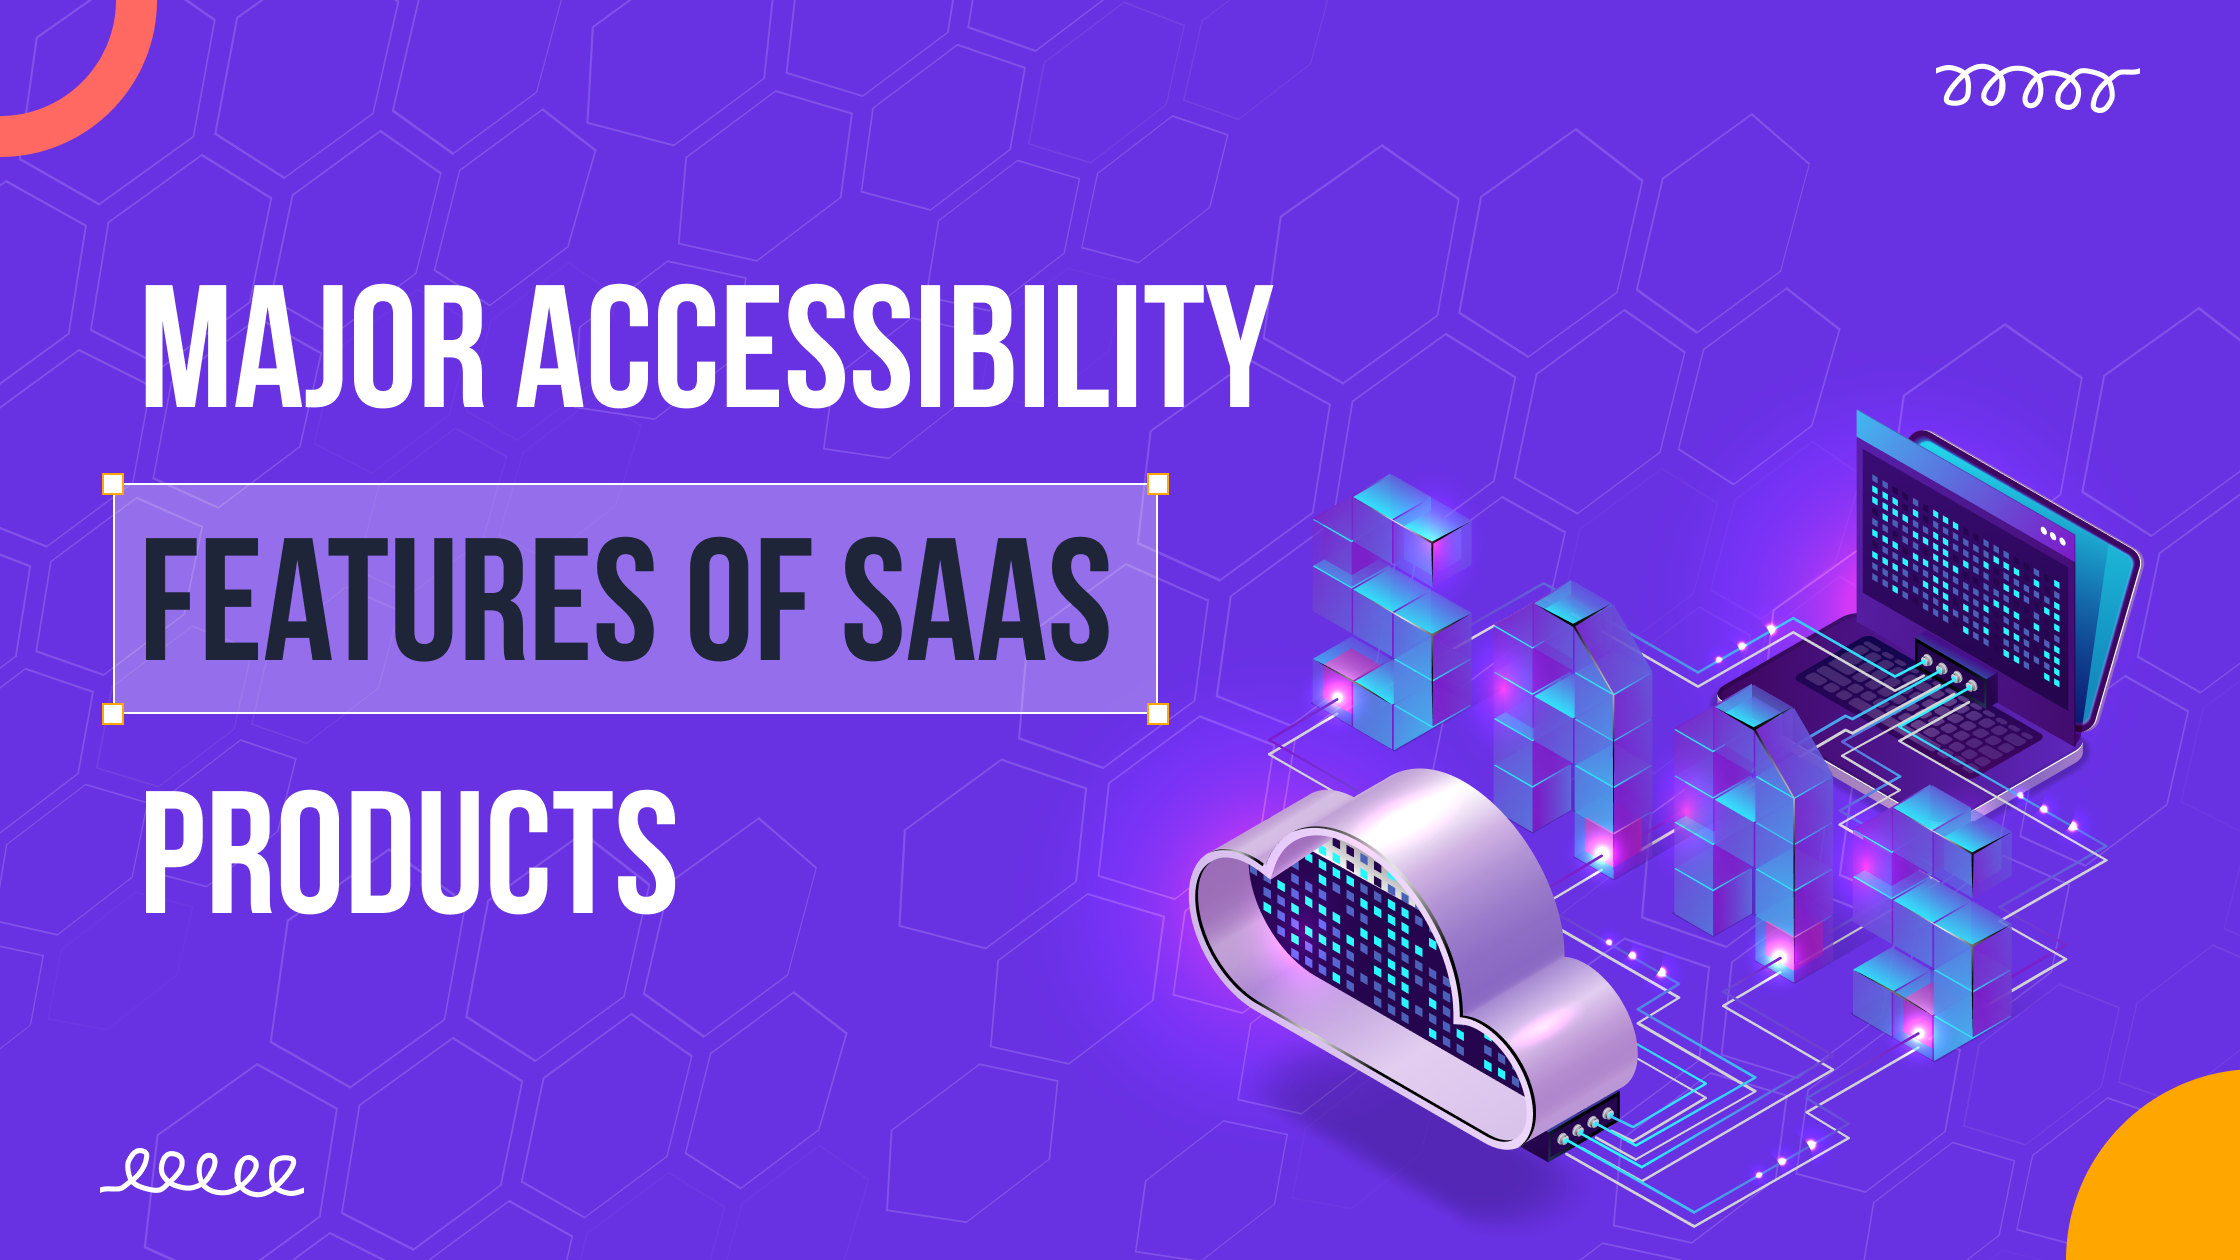 Major Accessibility Features of SaaS Products